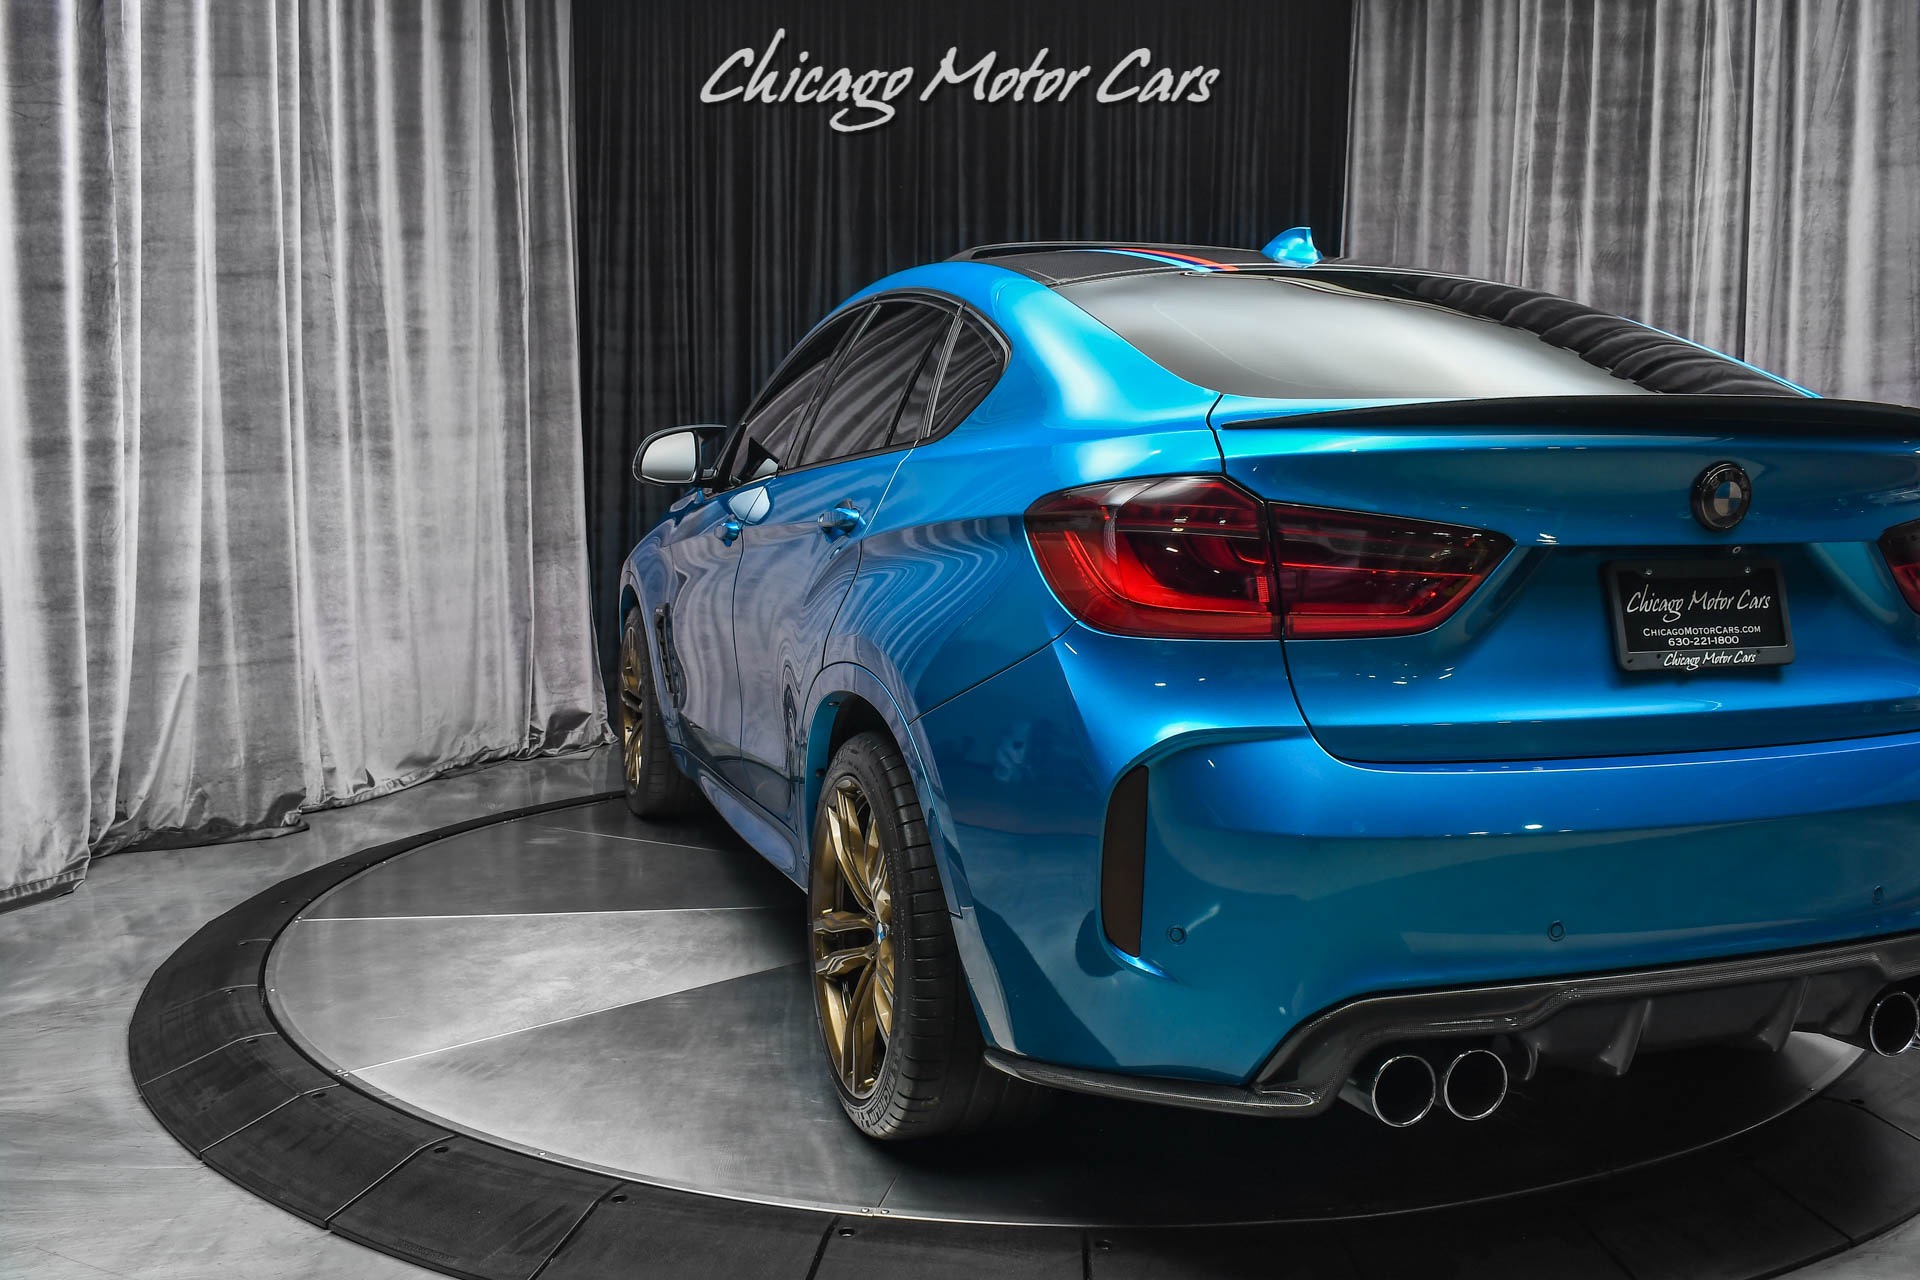 Used-2015-BMW-X6-M-700HP-Tune-H-R-Springs-Carbon-Fiber-Upgraded-Exhaust